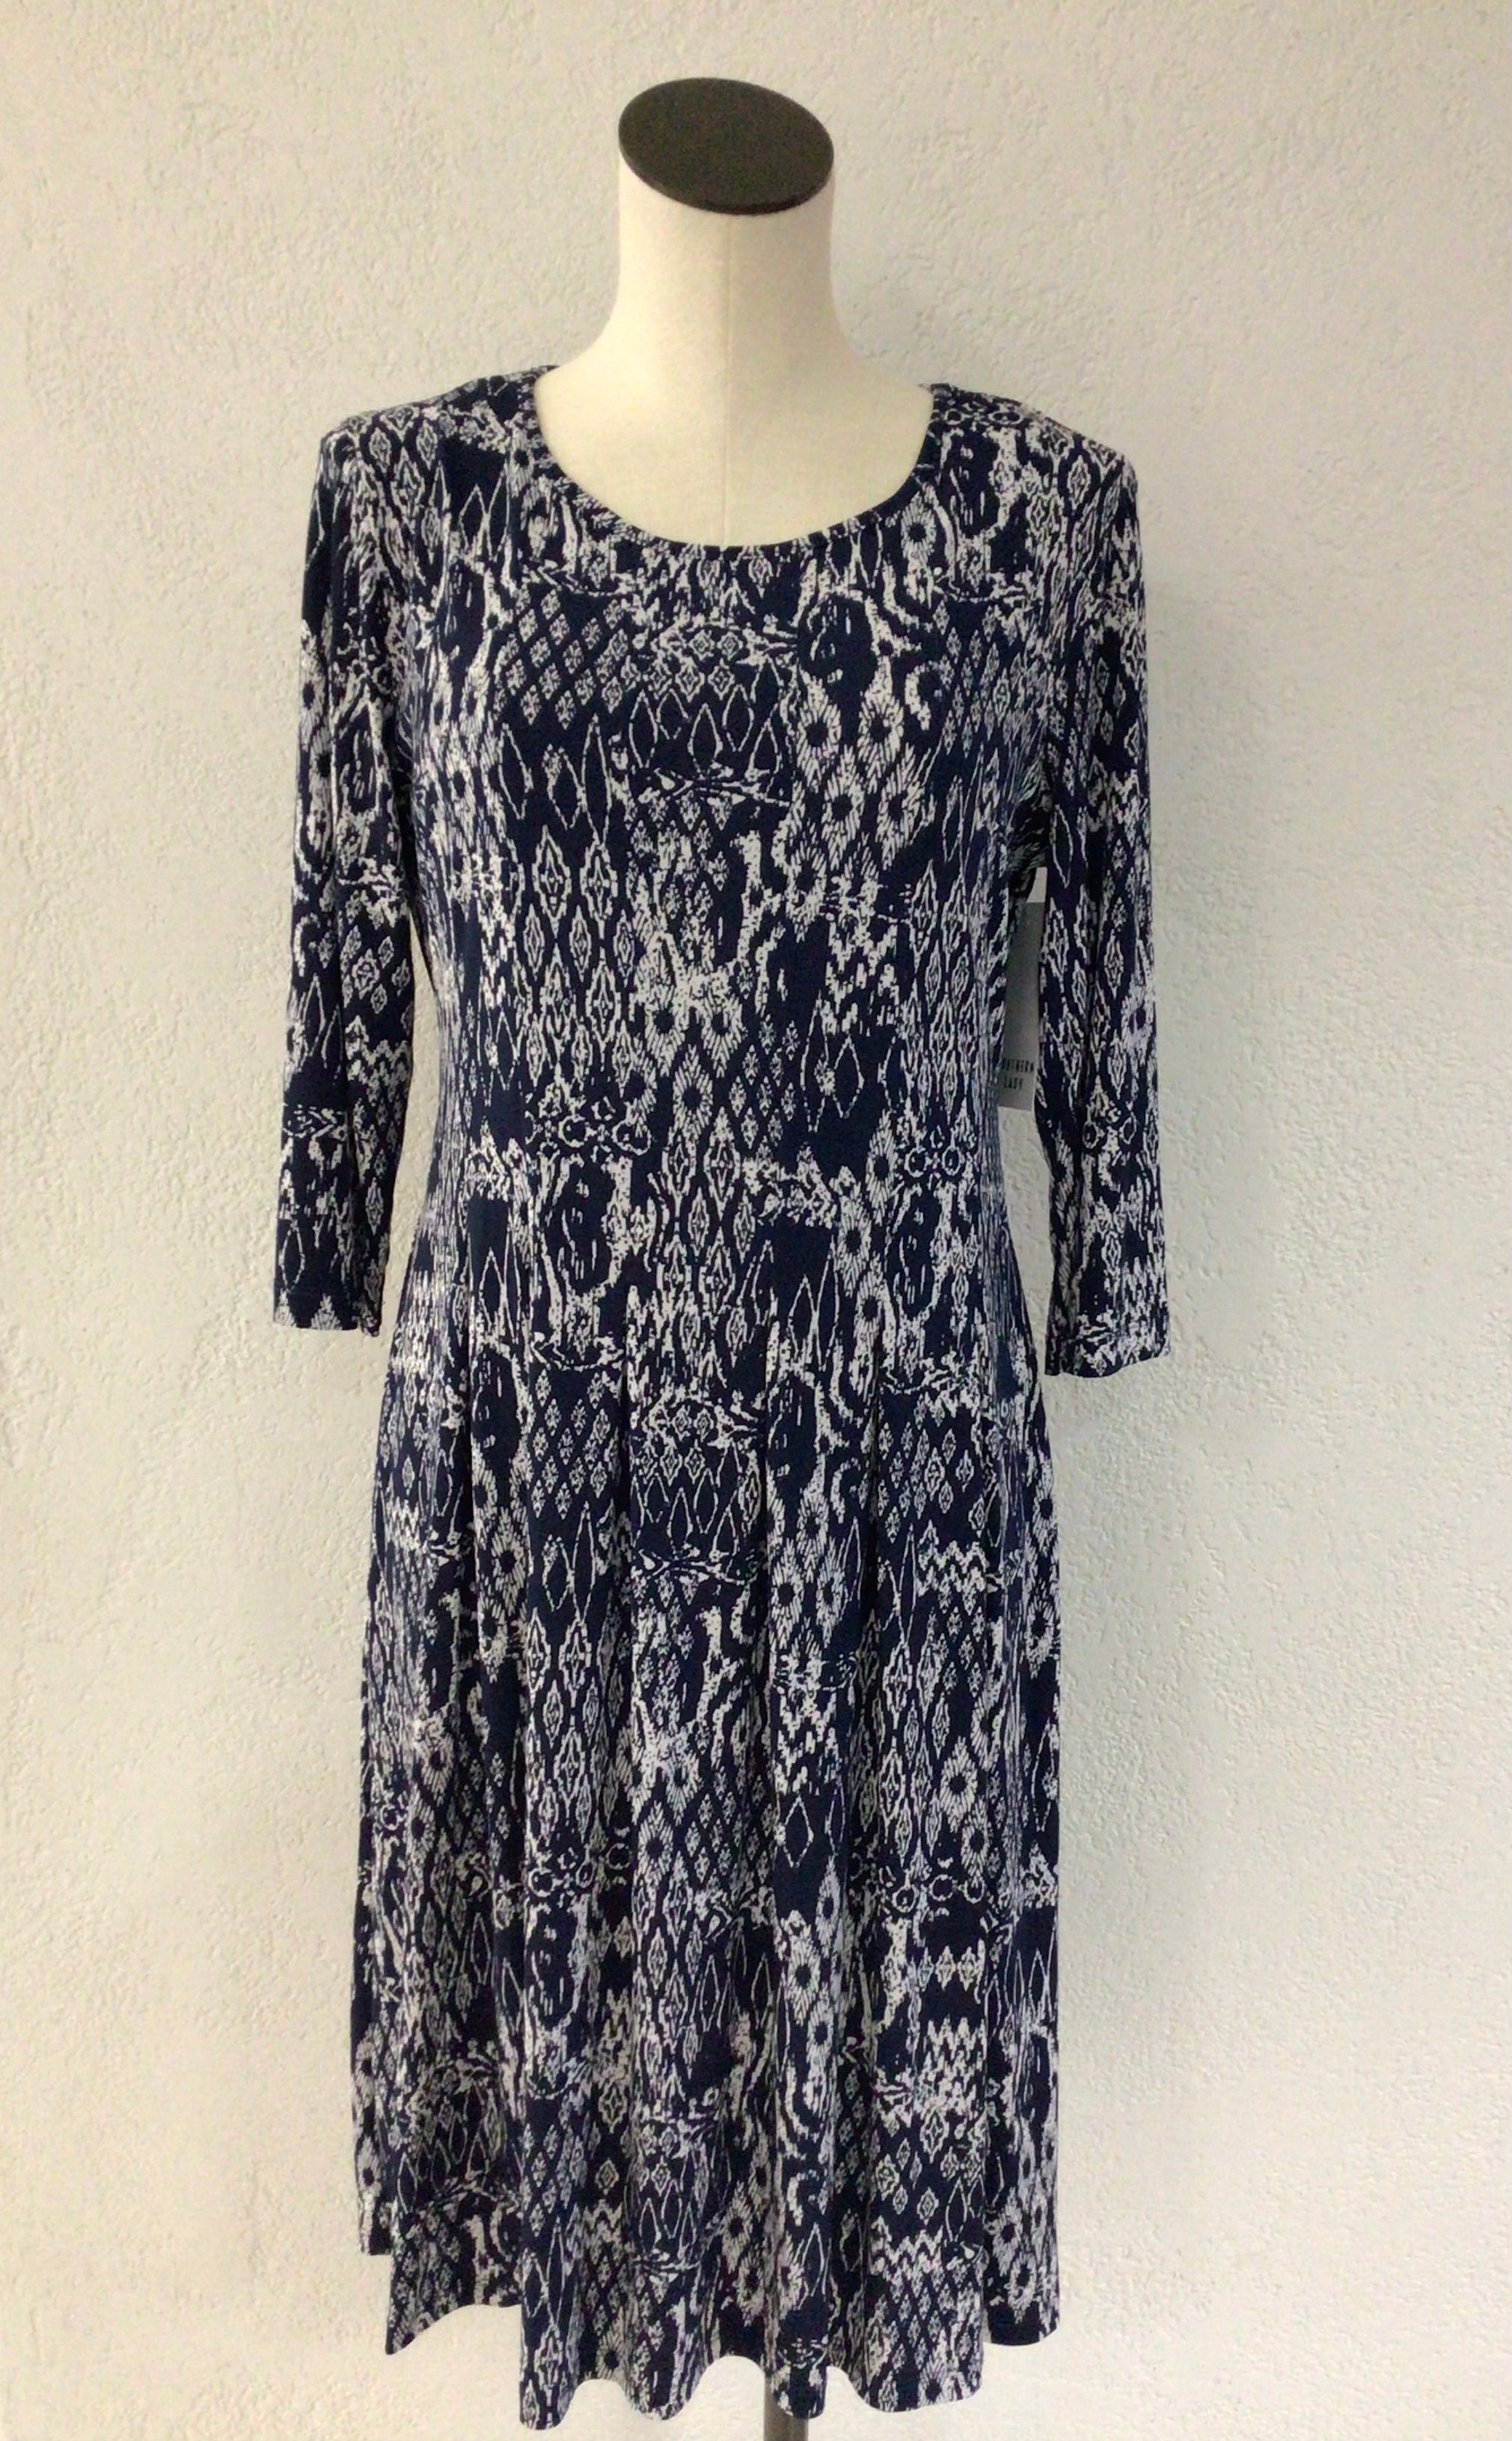 Southern Lady Navy and White Print Dress S2346